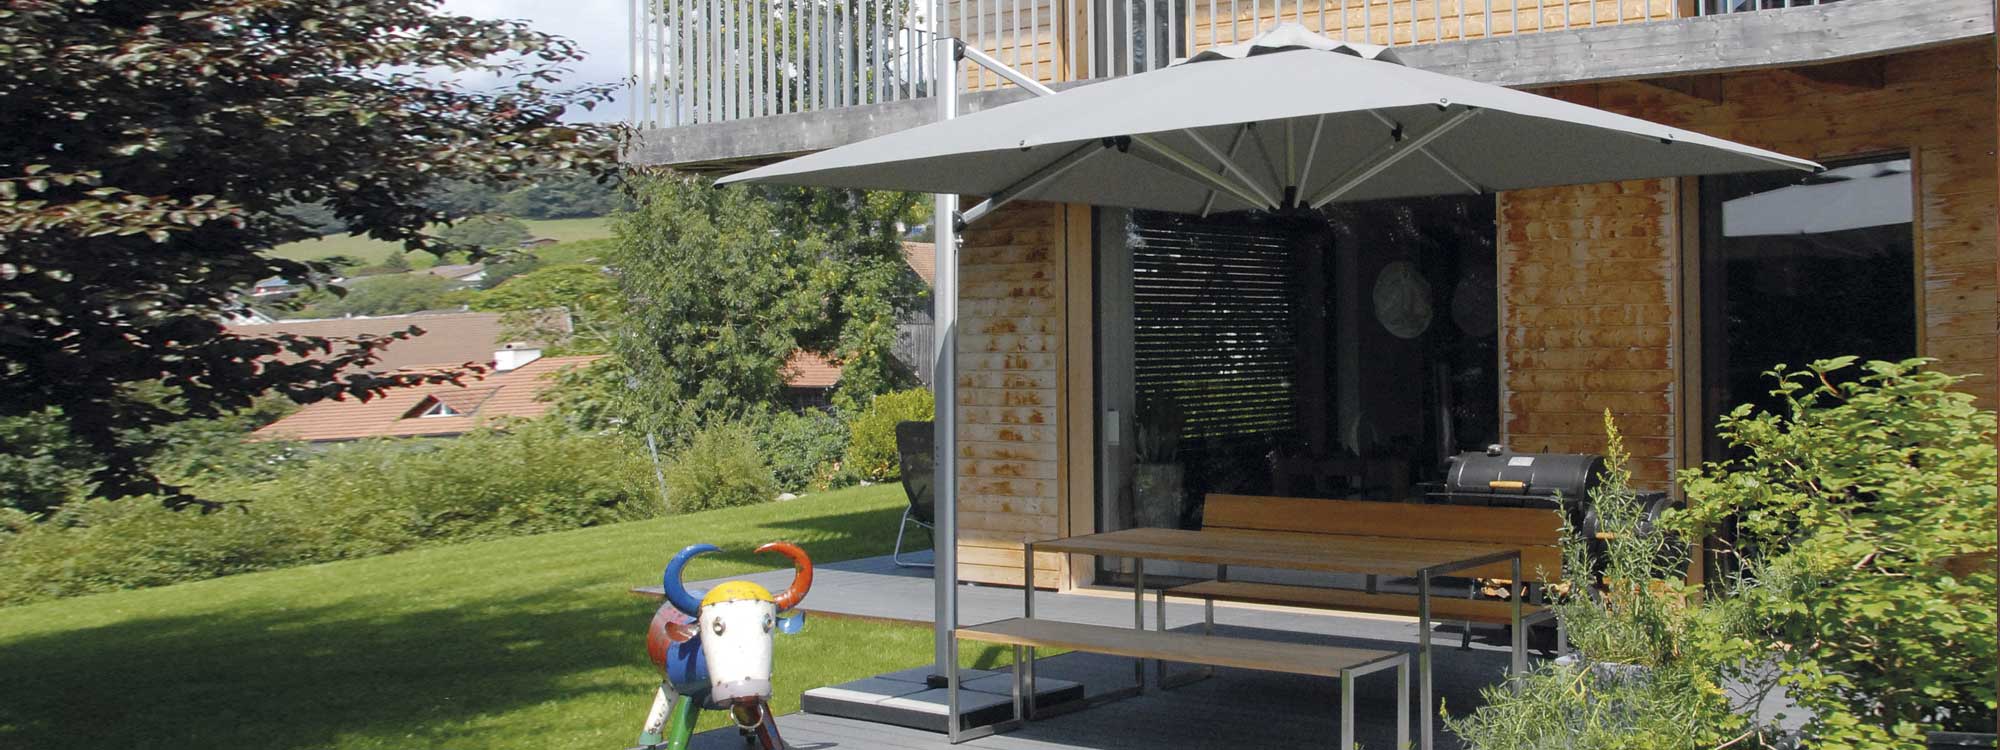 Sirius cantilever parasol is a tilting and revolving sunshade in marine grade parasol materials by Shademaker high quality parasol company.